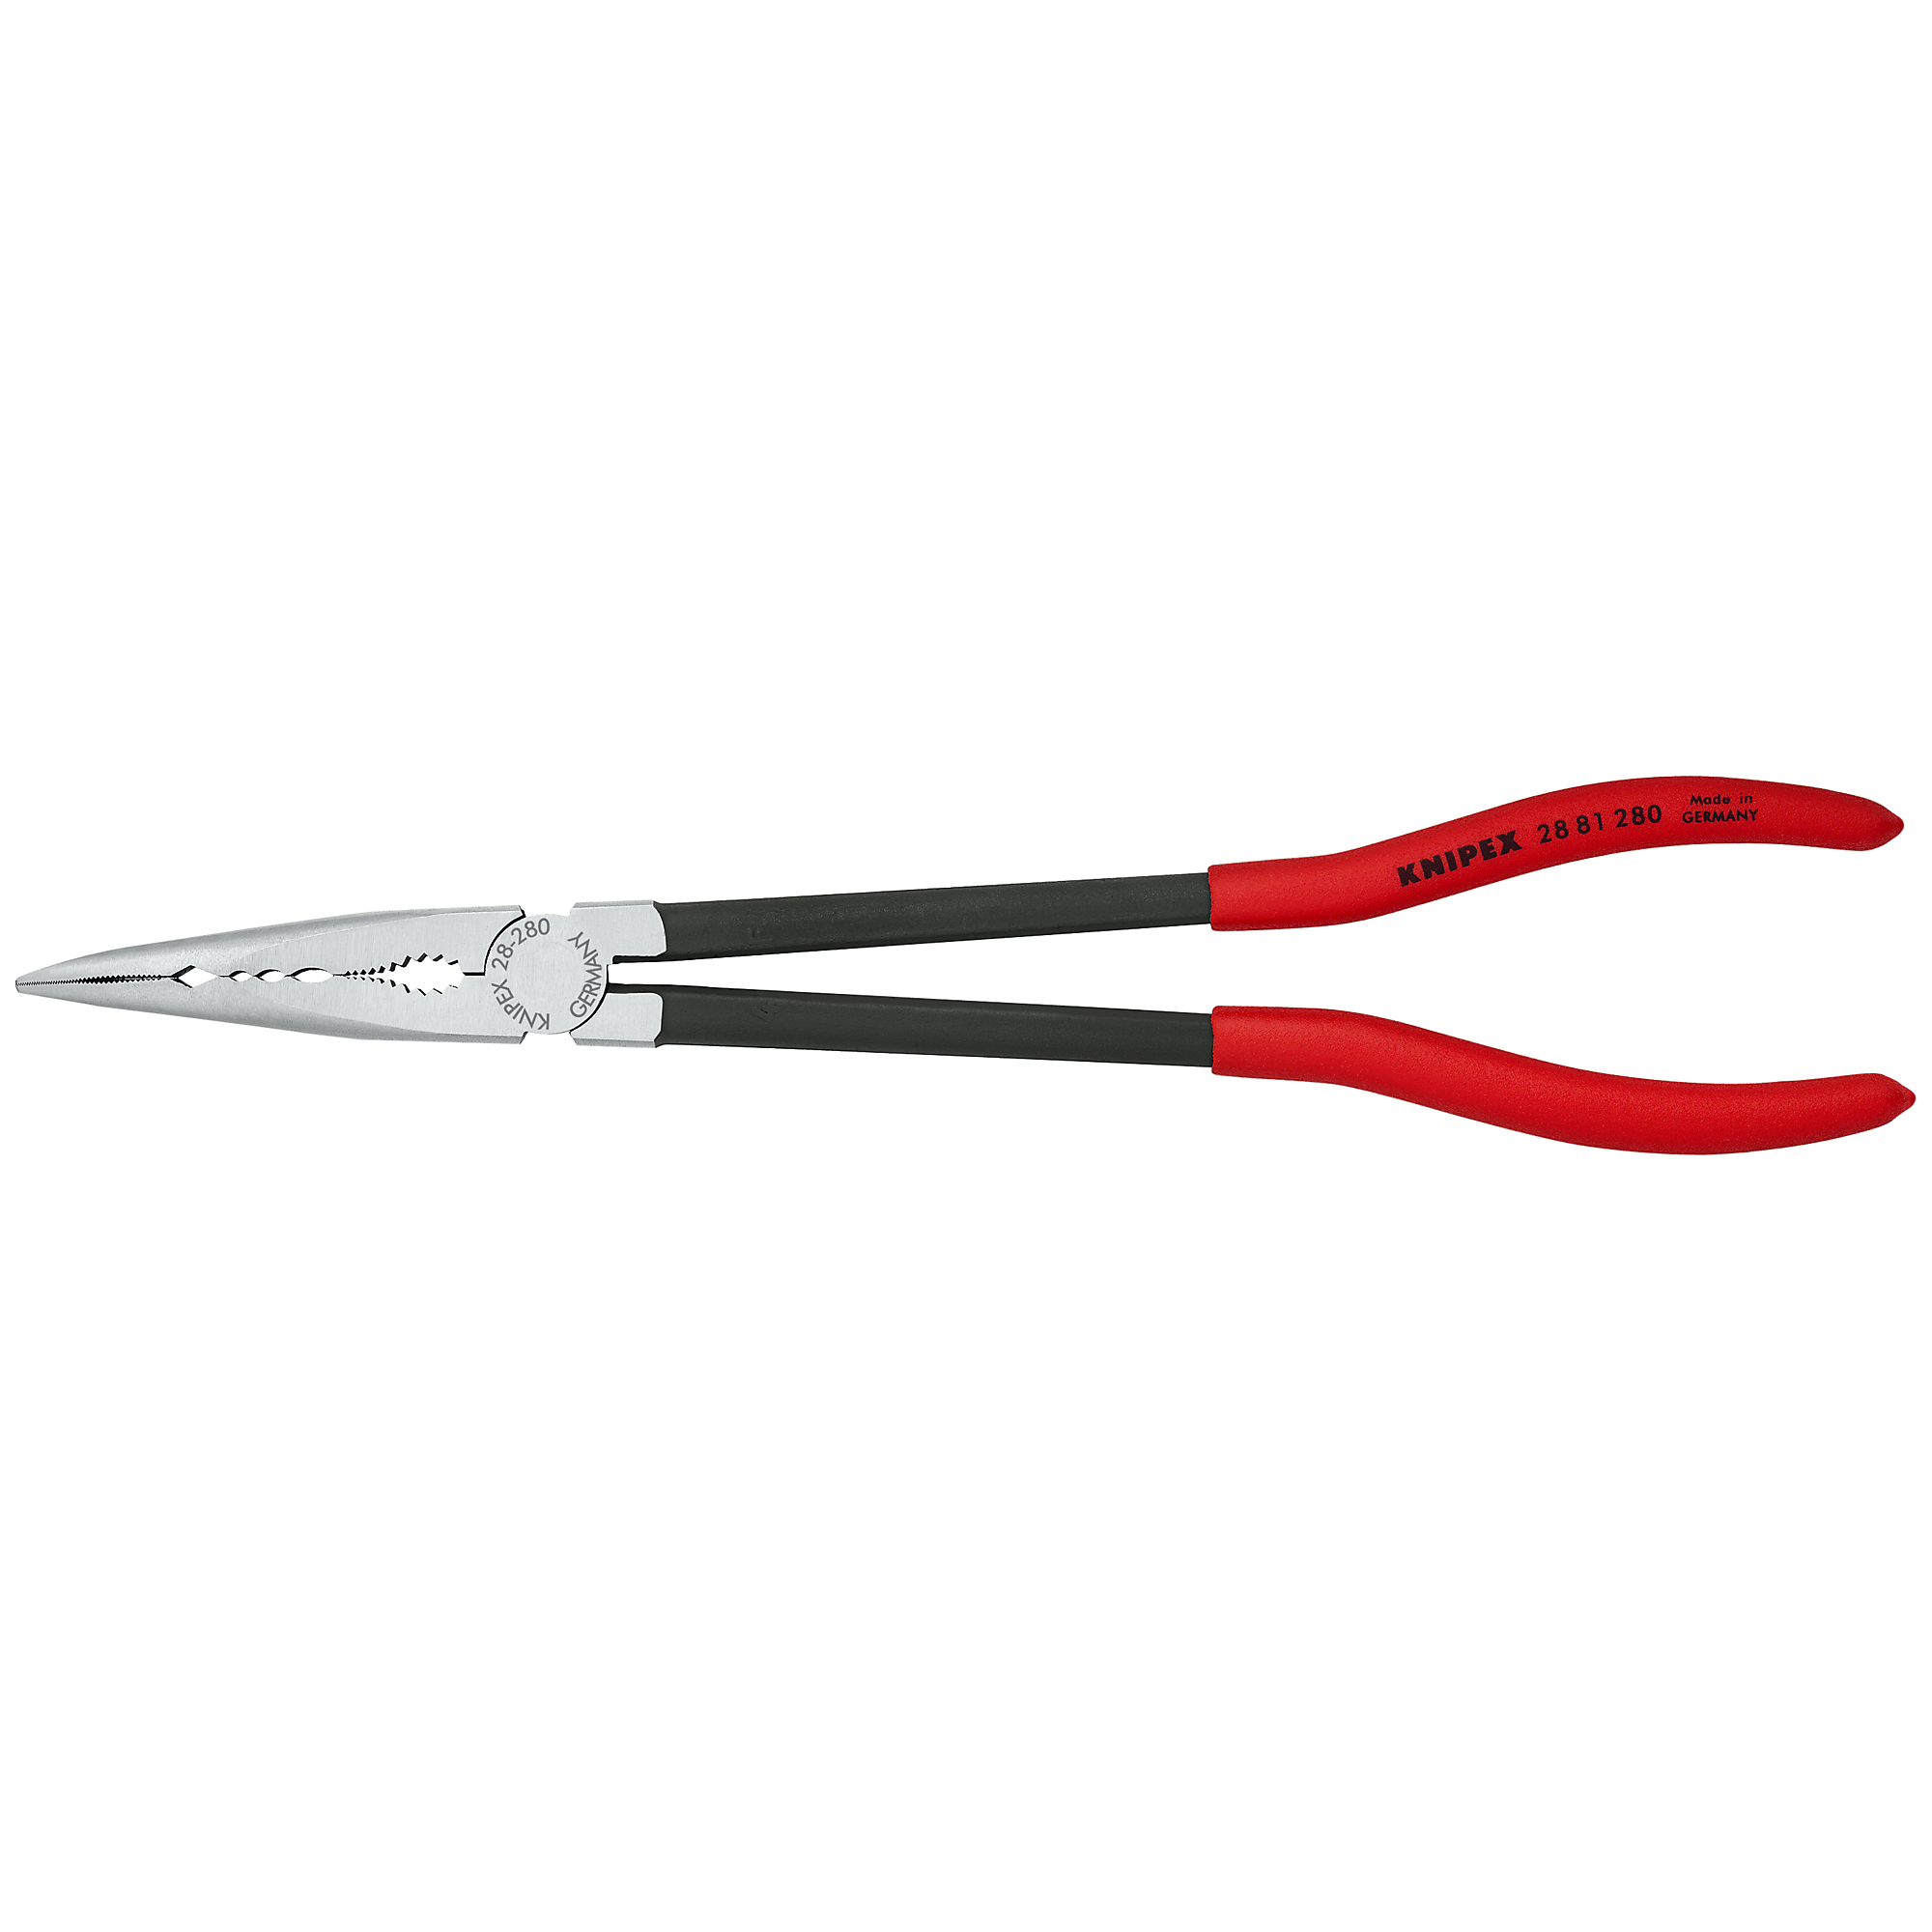 KNIPEX, XL Needle-Nose 45Â° Angled Pliers, Bulk, 11Inch, Pieces (qty.) 1 Material Steel, Model 28 81 280